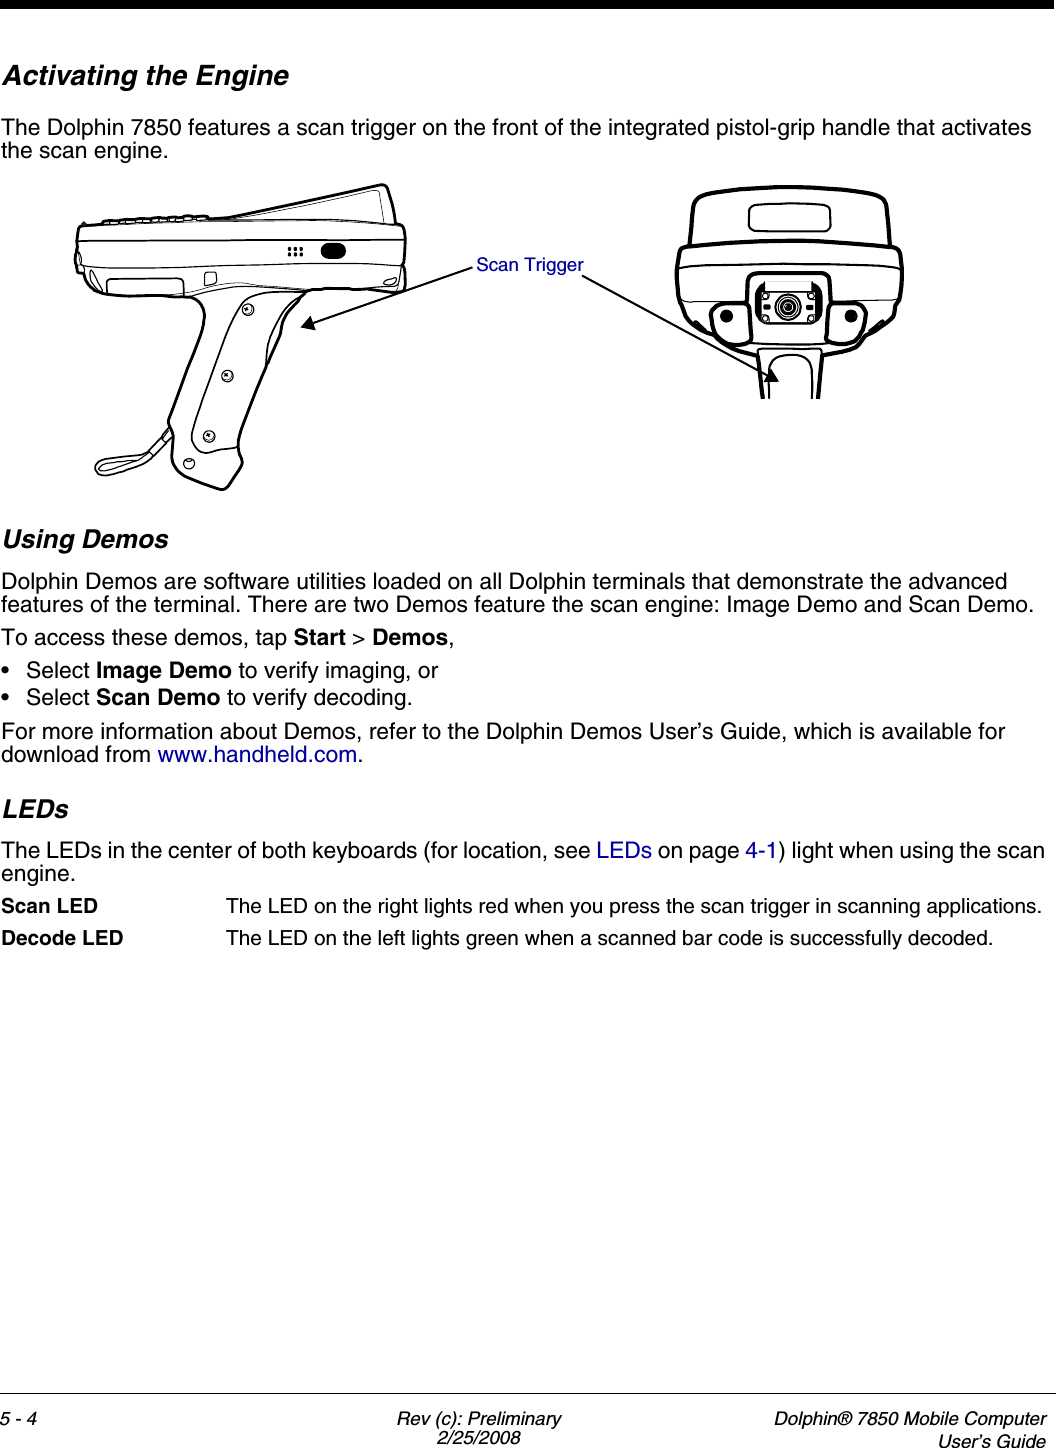 5 - 4 Rev (c): Preliminary2/25/2008Dolphin® 7850 Mobile ComputerUser’s GuideActivating the EngineThe Dolphin 7850 features a scan trigger on the front of the integrated pistol-grip handle that activates the scan engine.Using DemosDolphin Demos are software utilities loaded on all Dolphin terminals that demonstrate the advanced features of the terminal. There are two Demos feature the scan engine: Image Demo and Scan Demo.To access these demos, tap Start &gt; Demos,•Select Image Demo to verify imaging, or•Select Scan Demo to verify decoding.For more information about Demos, refer to the Dolphin Demos User’s Guide, which is available for download from www.handheld.com.LEDsThe LEDs in the center of both keyboards (for location, see LEDs on page 4-1) light when using the scan engine.Scan LED  The LED on the right lights red when you press the scan trigger in scanning applications.Decode LED  The LED on the left lights green when a scanned bar code is successfully decoded.Scan Trigger